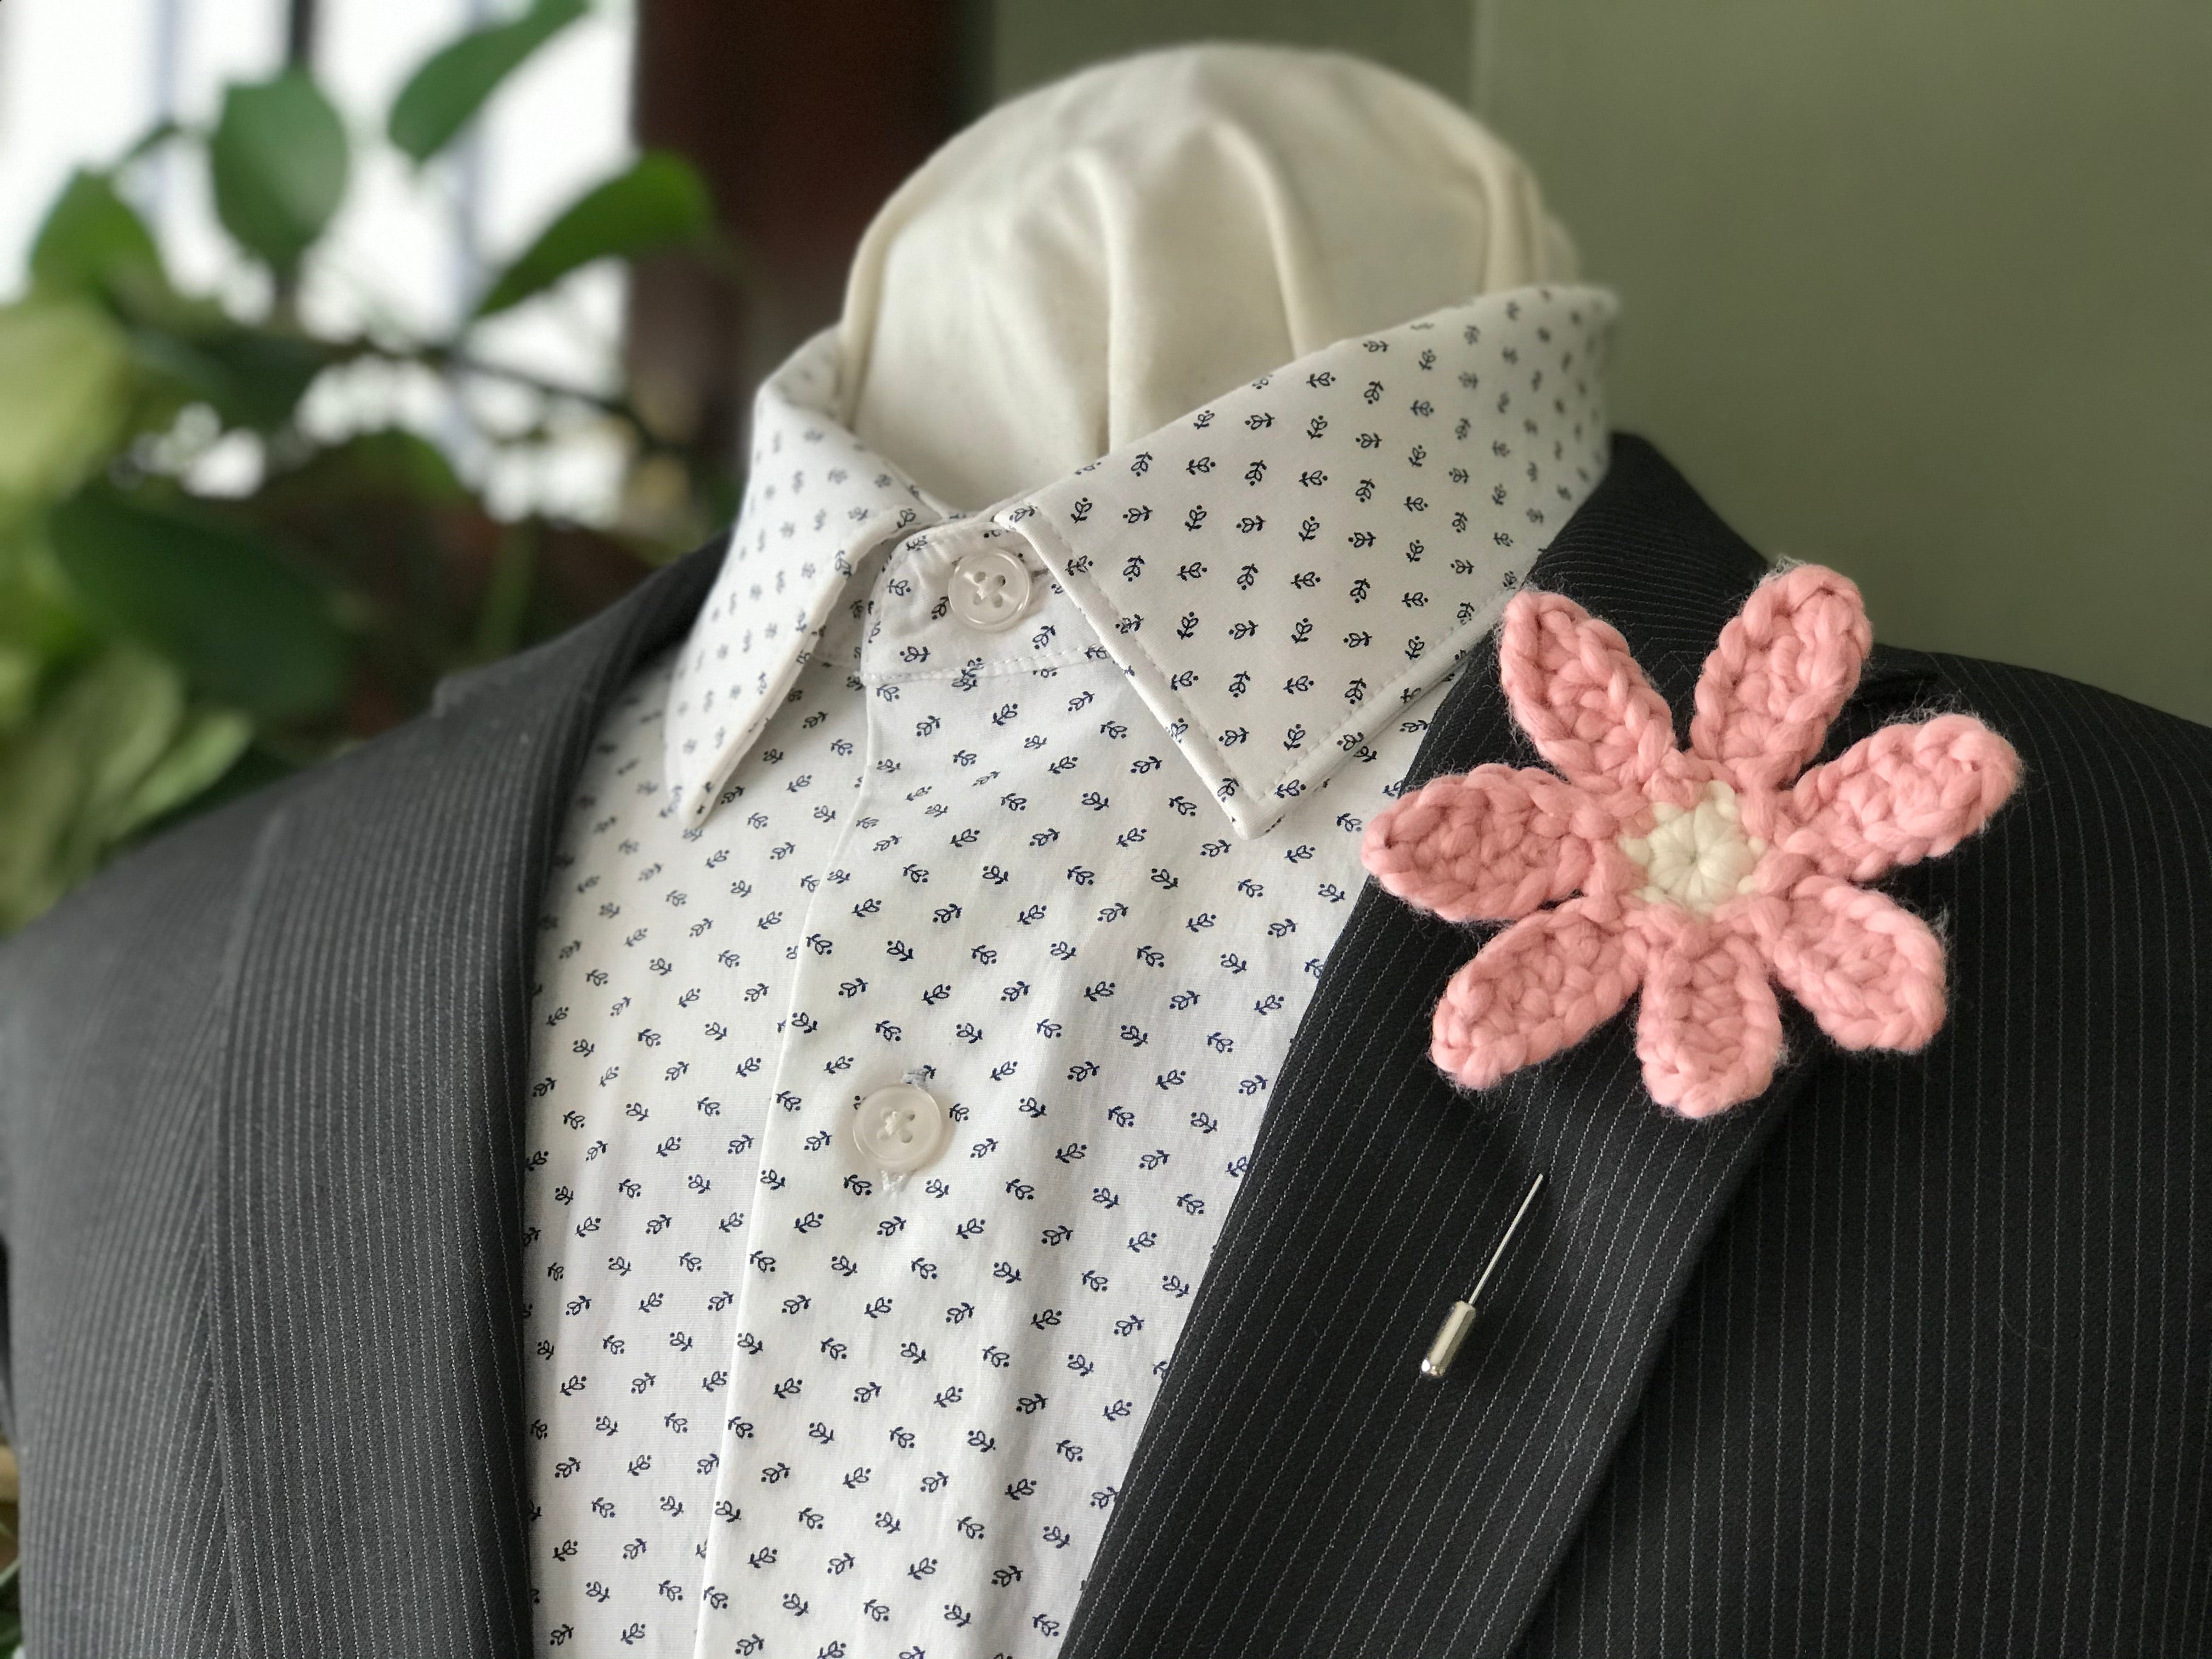 Valentine’s Day Pink Daisy Lapel Pin